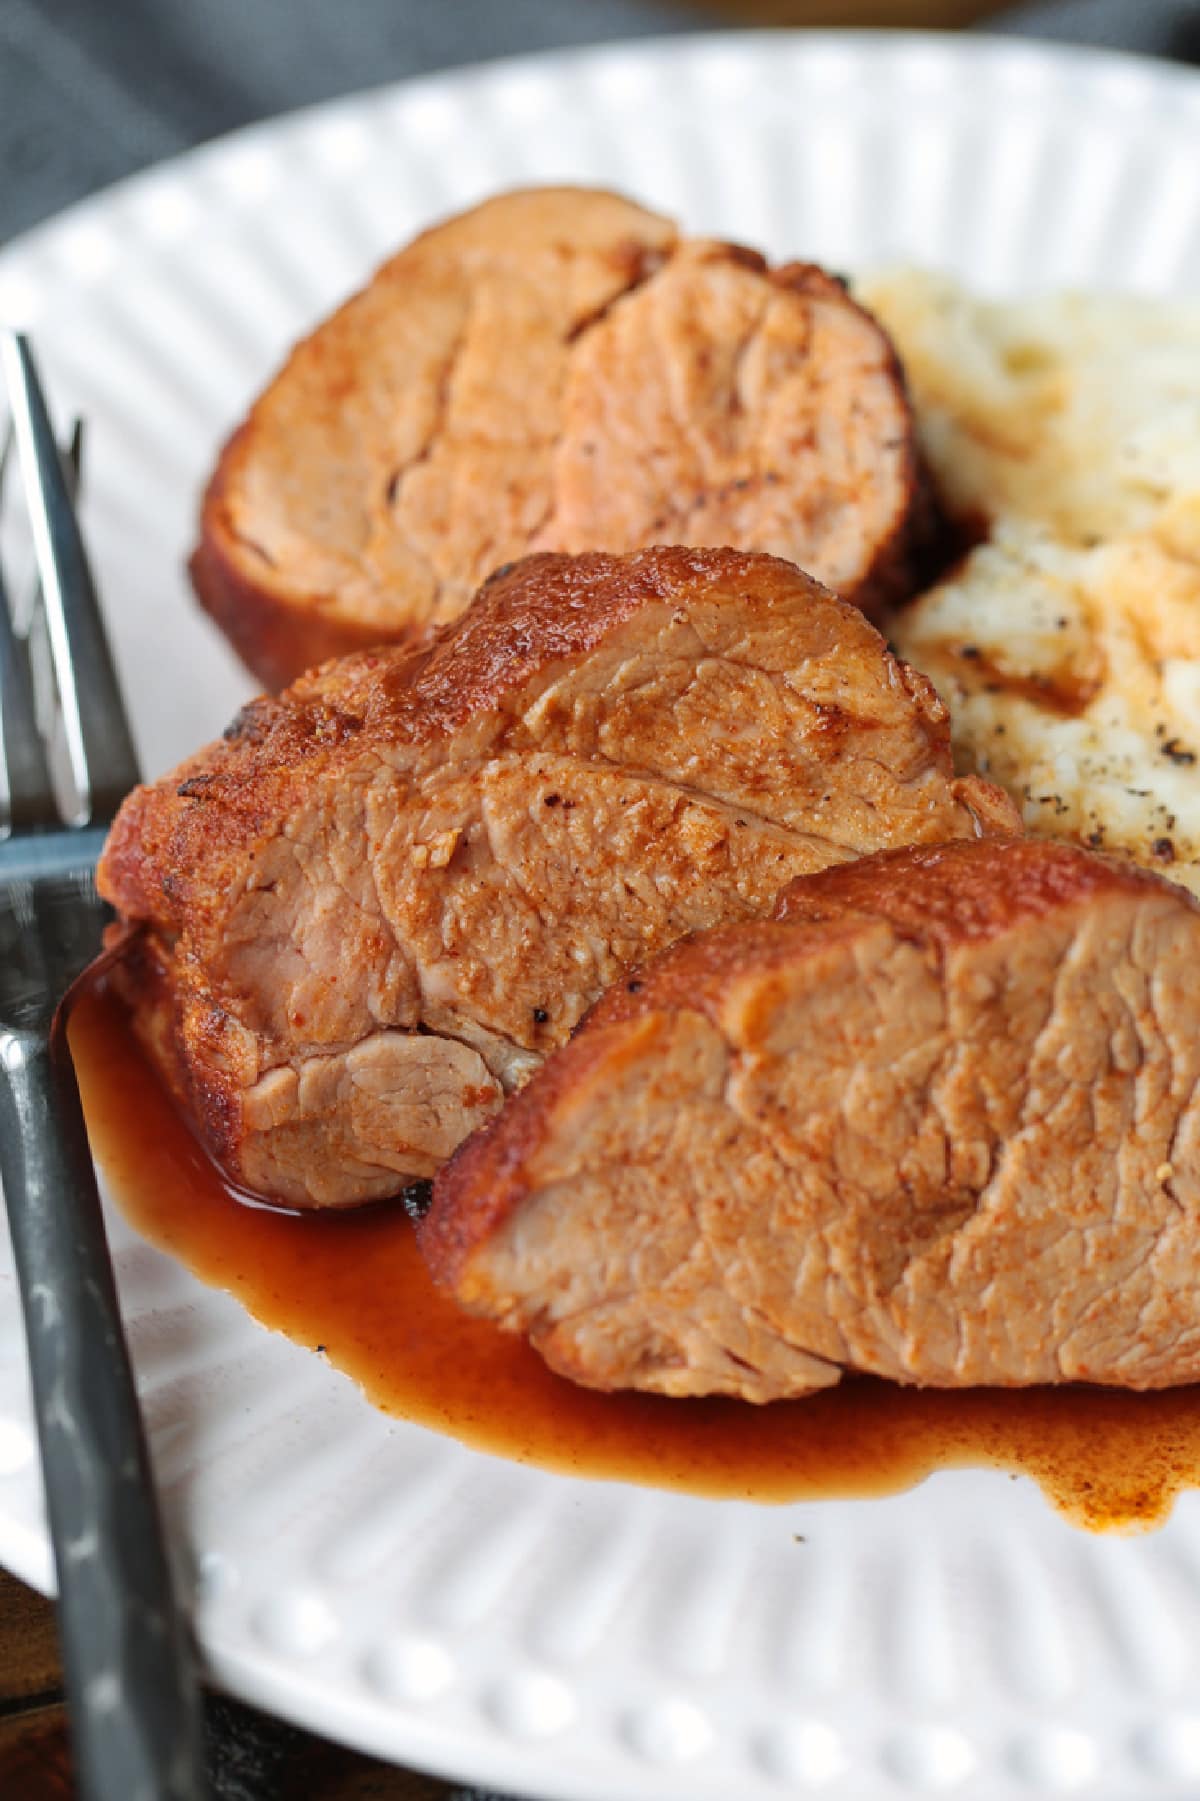 slices of pork tenderloin on plate with potatoes